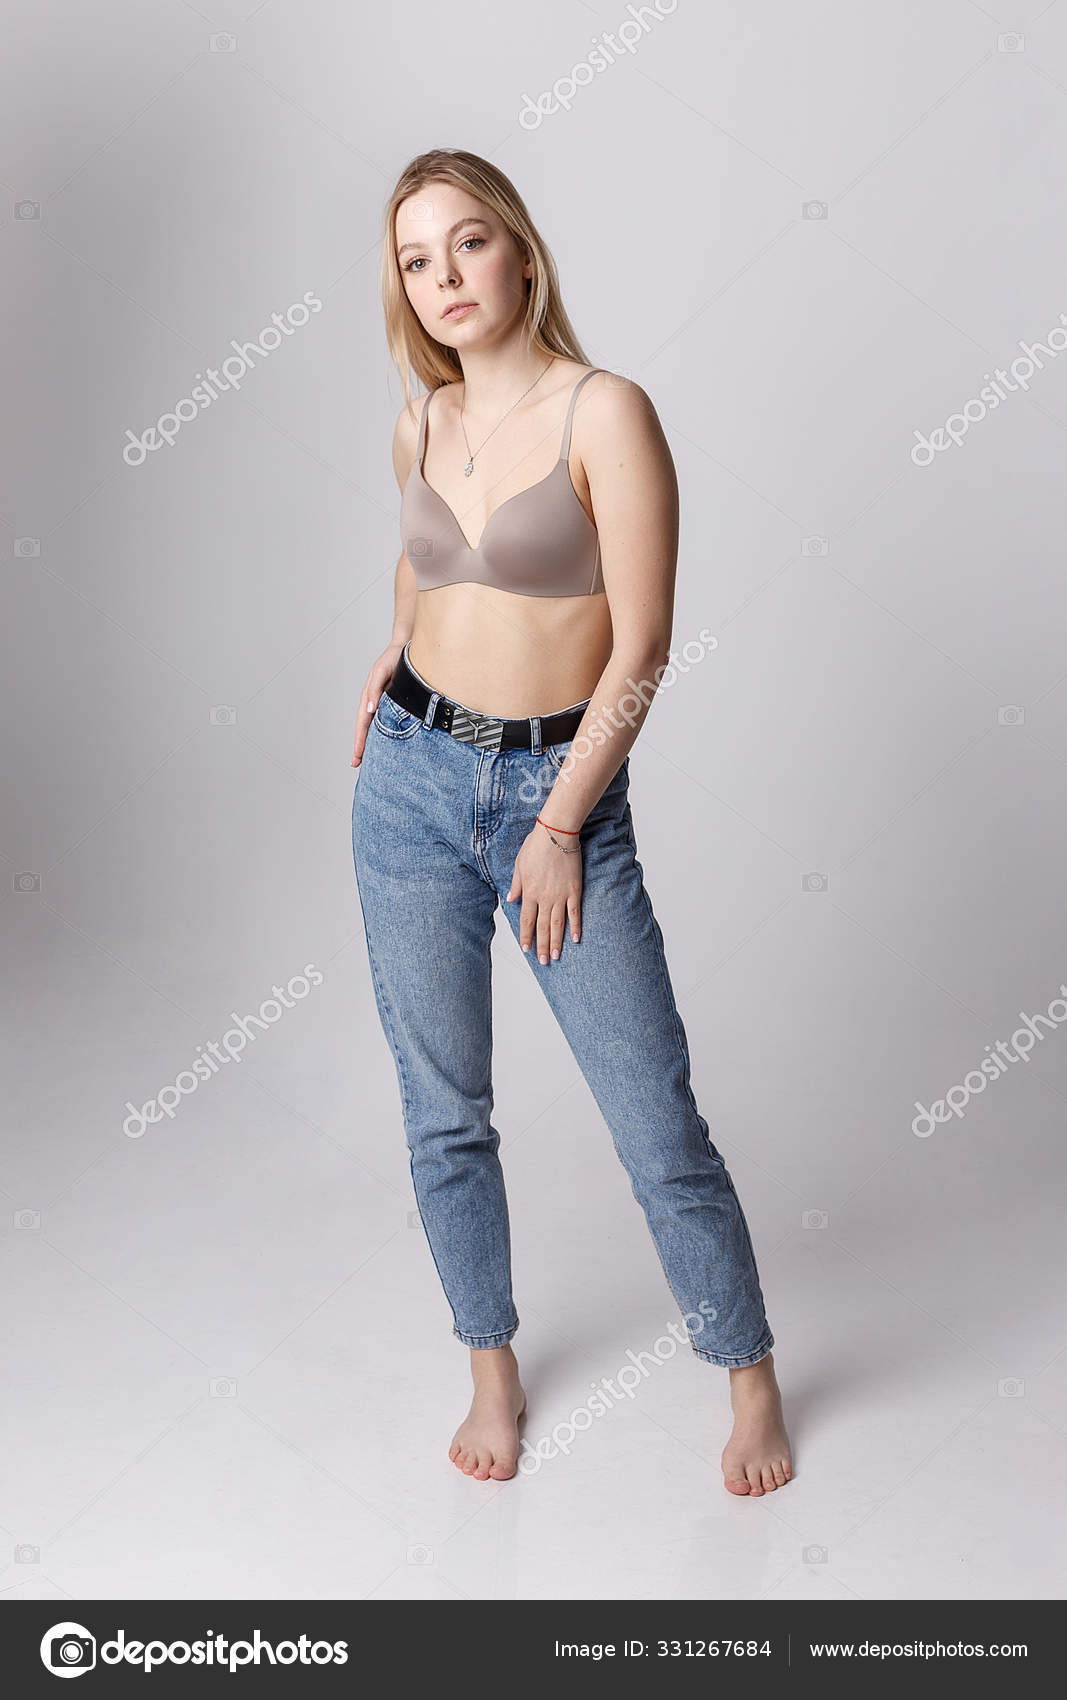 Young caucasian woman posing in blue bra and jeans. Stock Photo